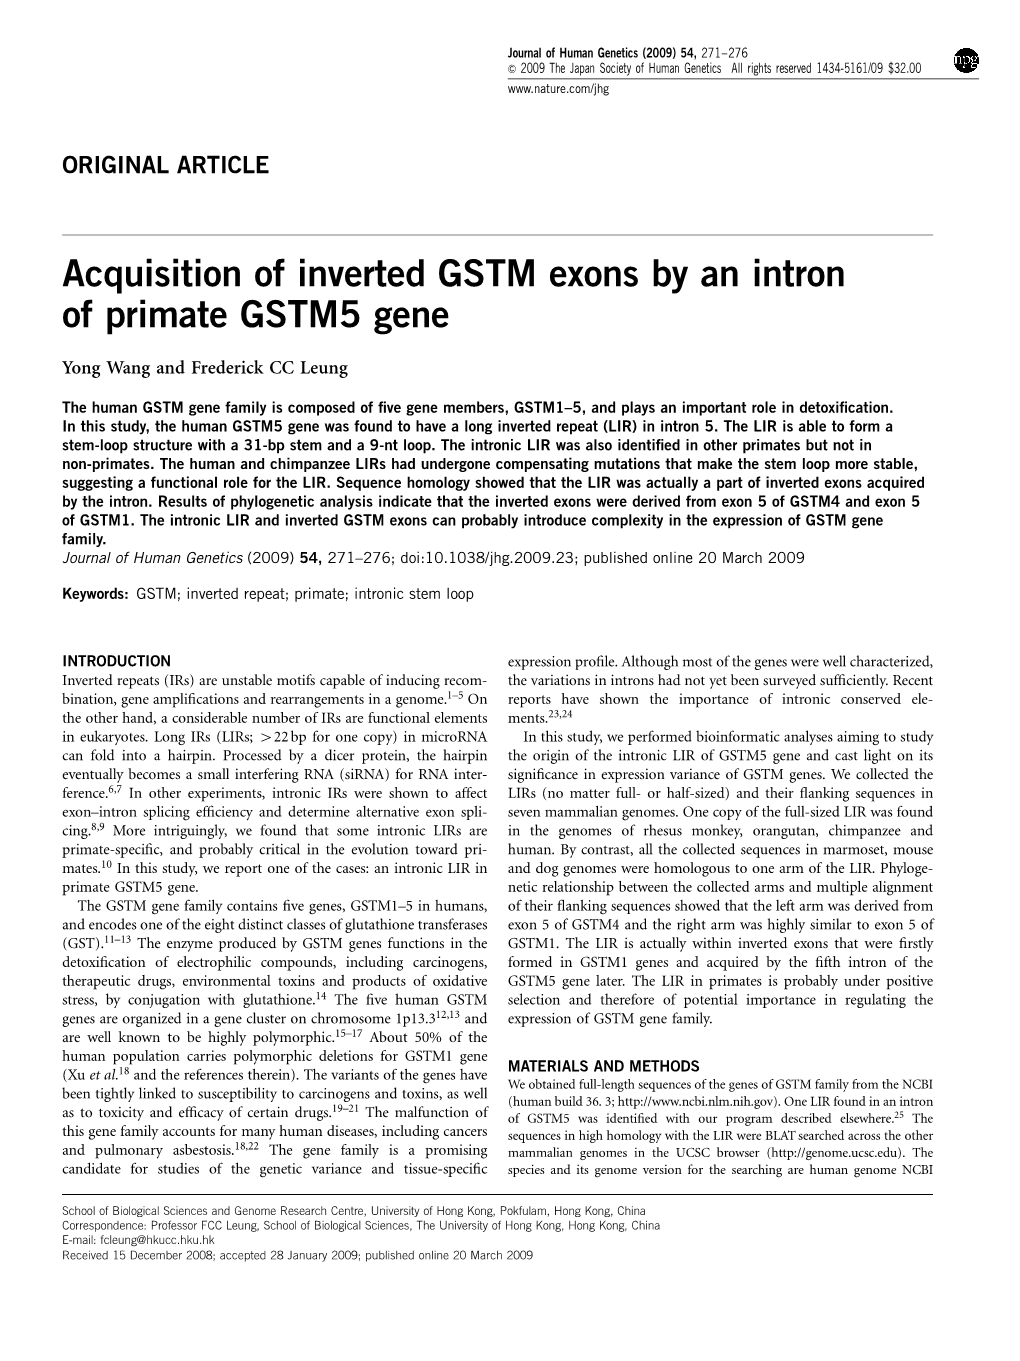 Acquisition of Inverted GSTM Exons by an Intron of Primate GSTM5 Gene